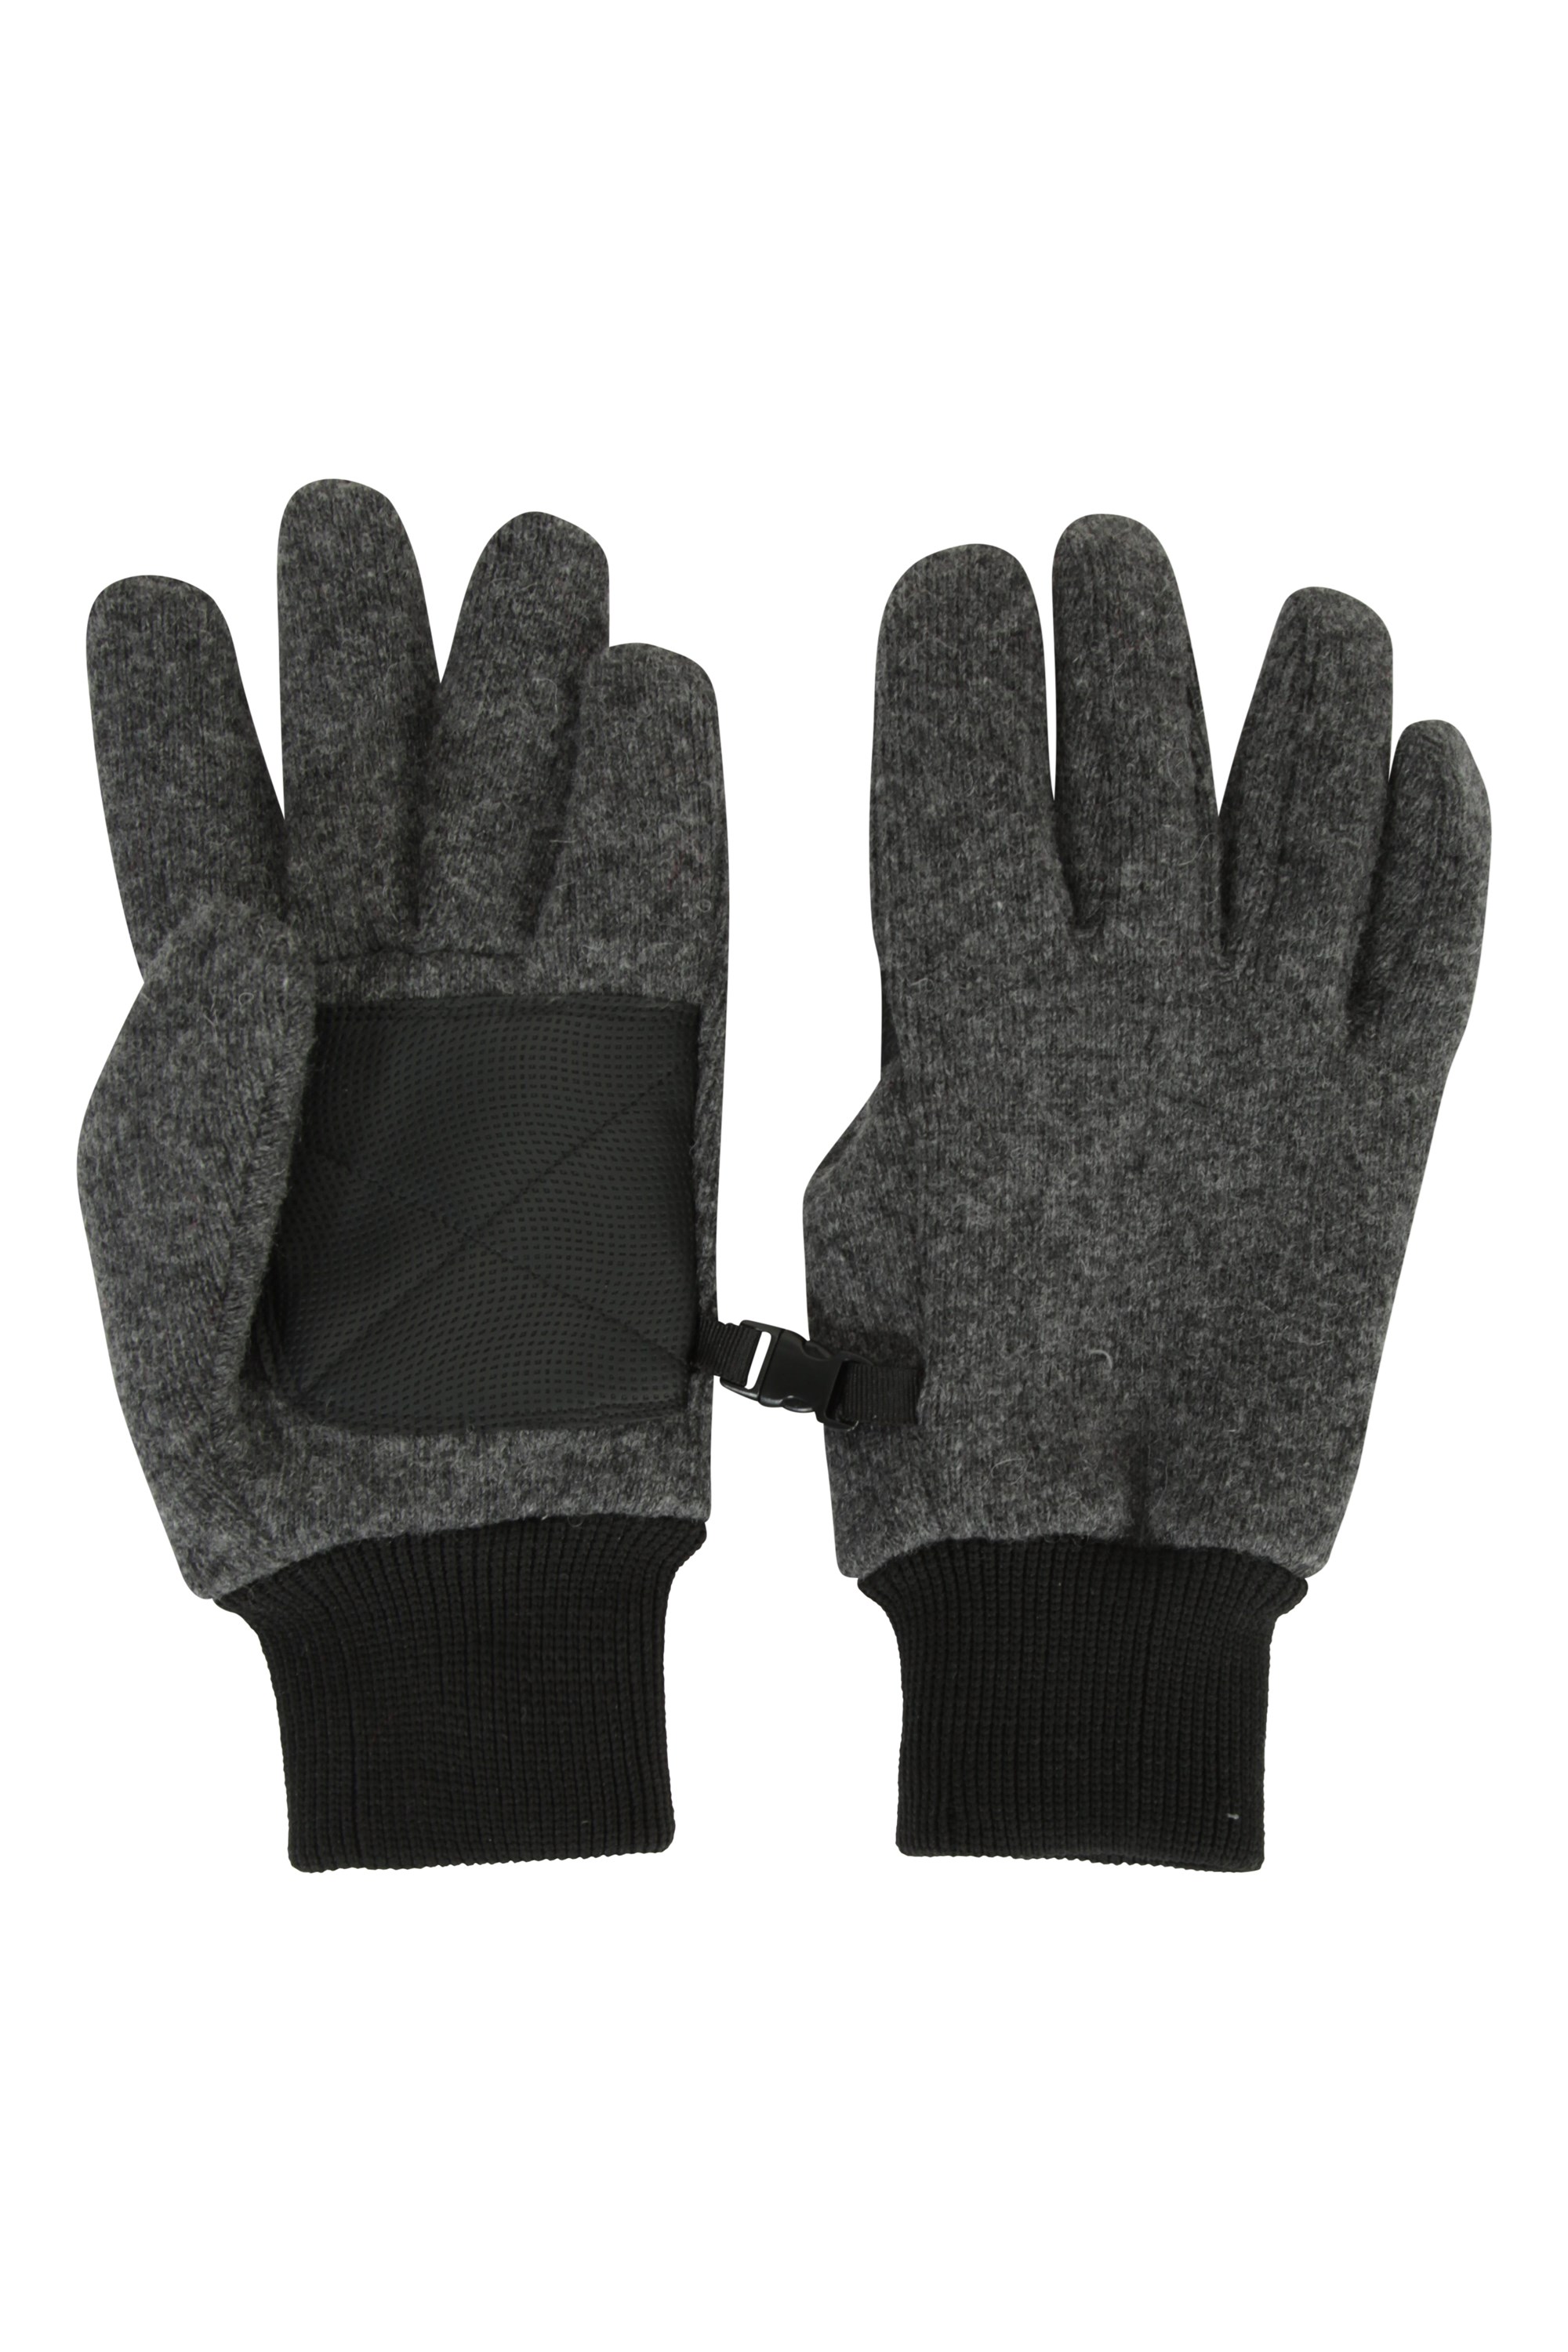 Mountain Warehouse Unisex Gloves in Black Knitted with Ribbed Cuffs in One Size 